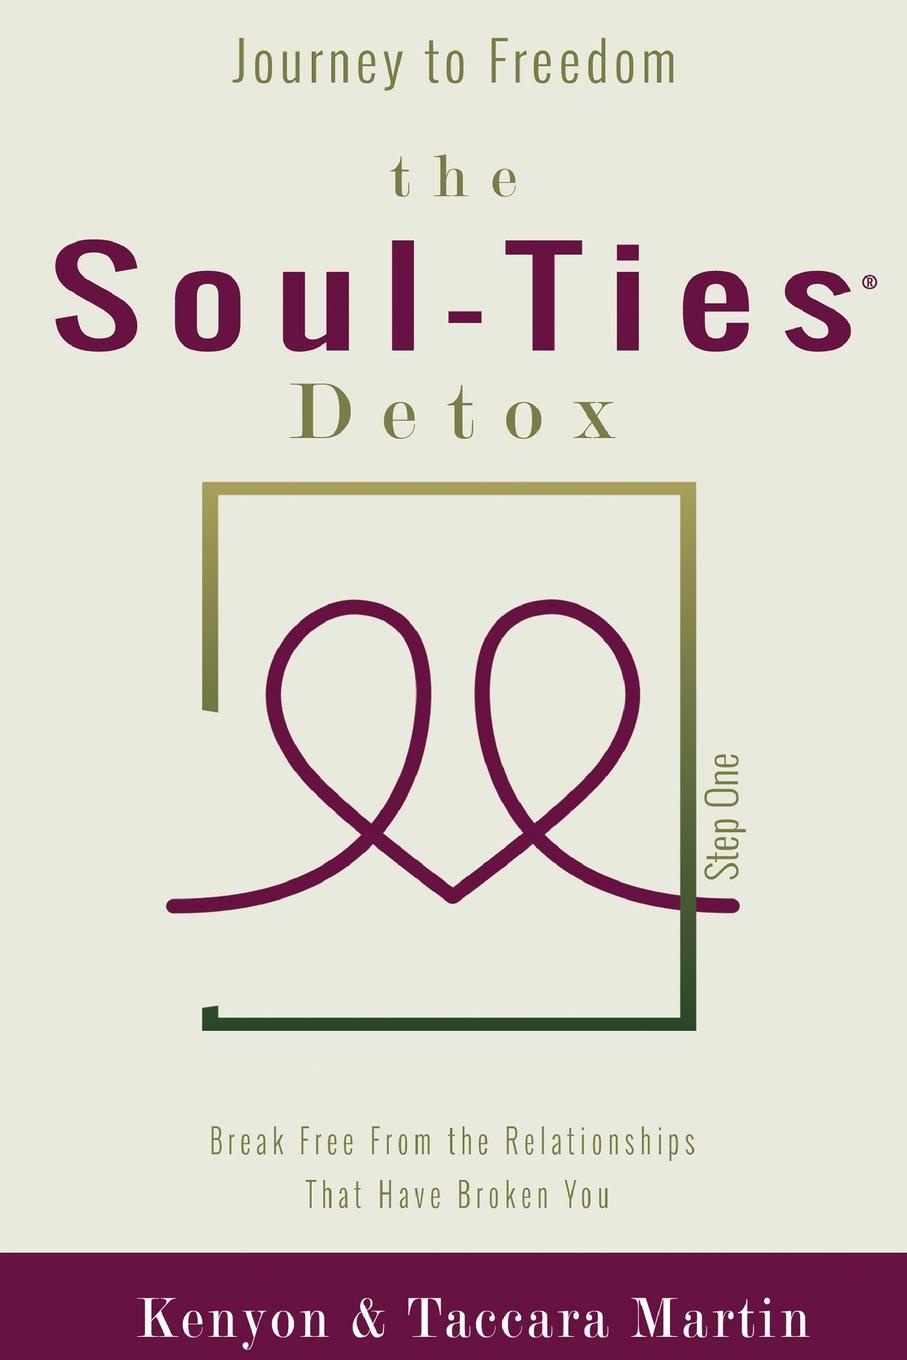 Journey to Freedom, The Soul-Ties. Detox. Break Free From the Relationships that Have Broken You